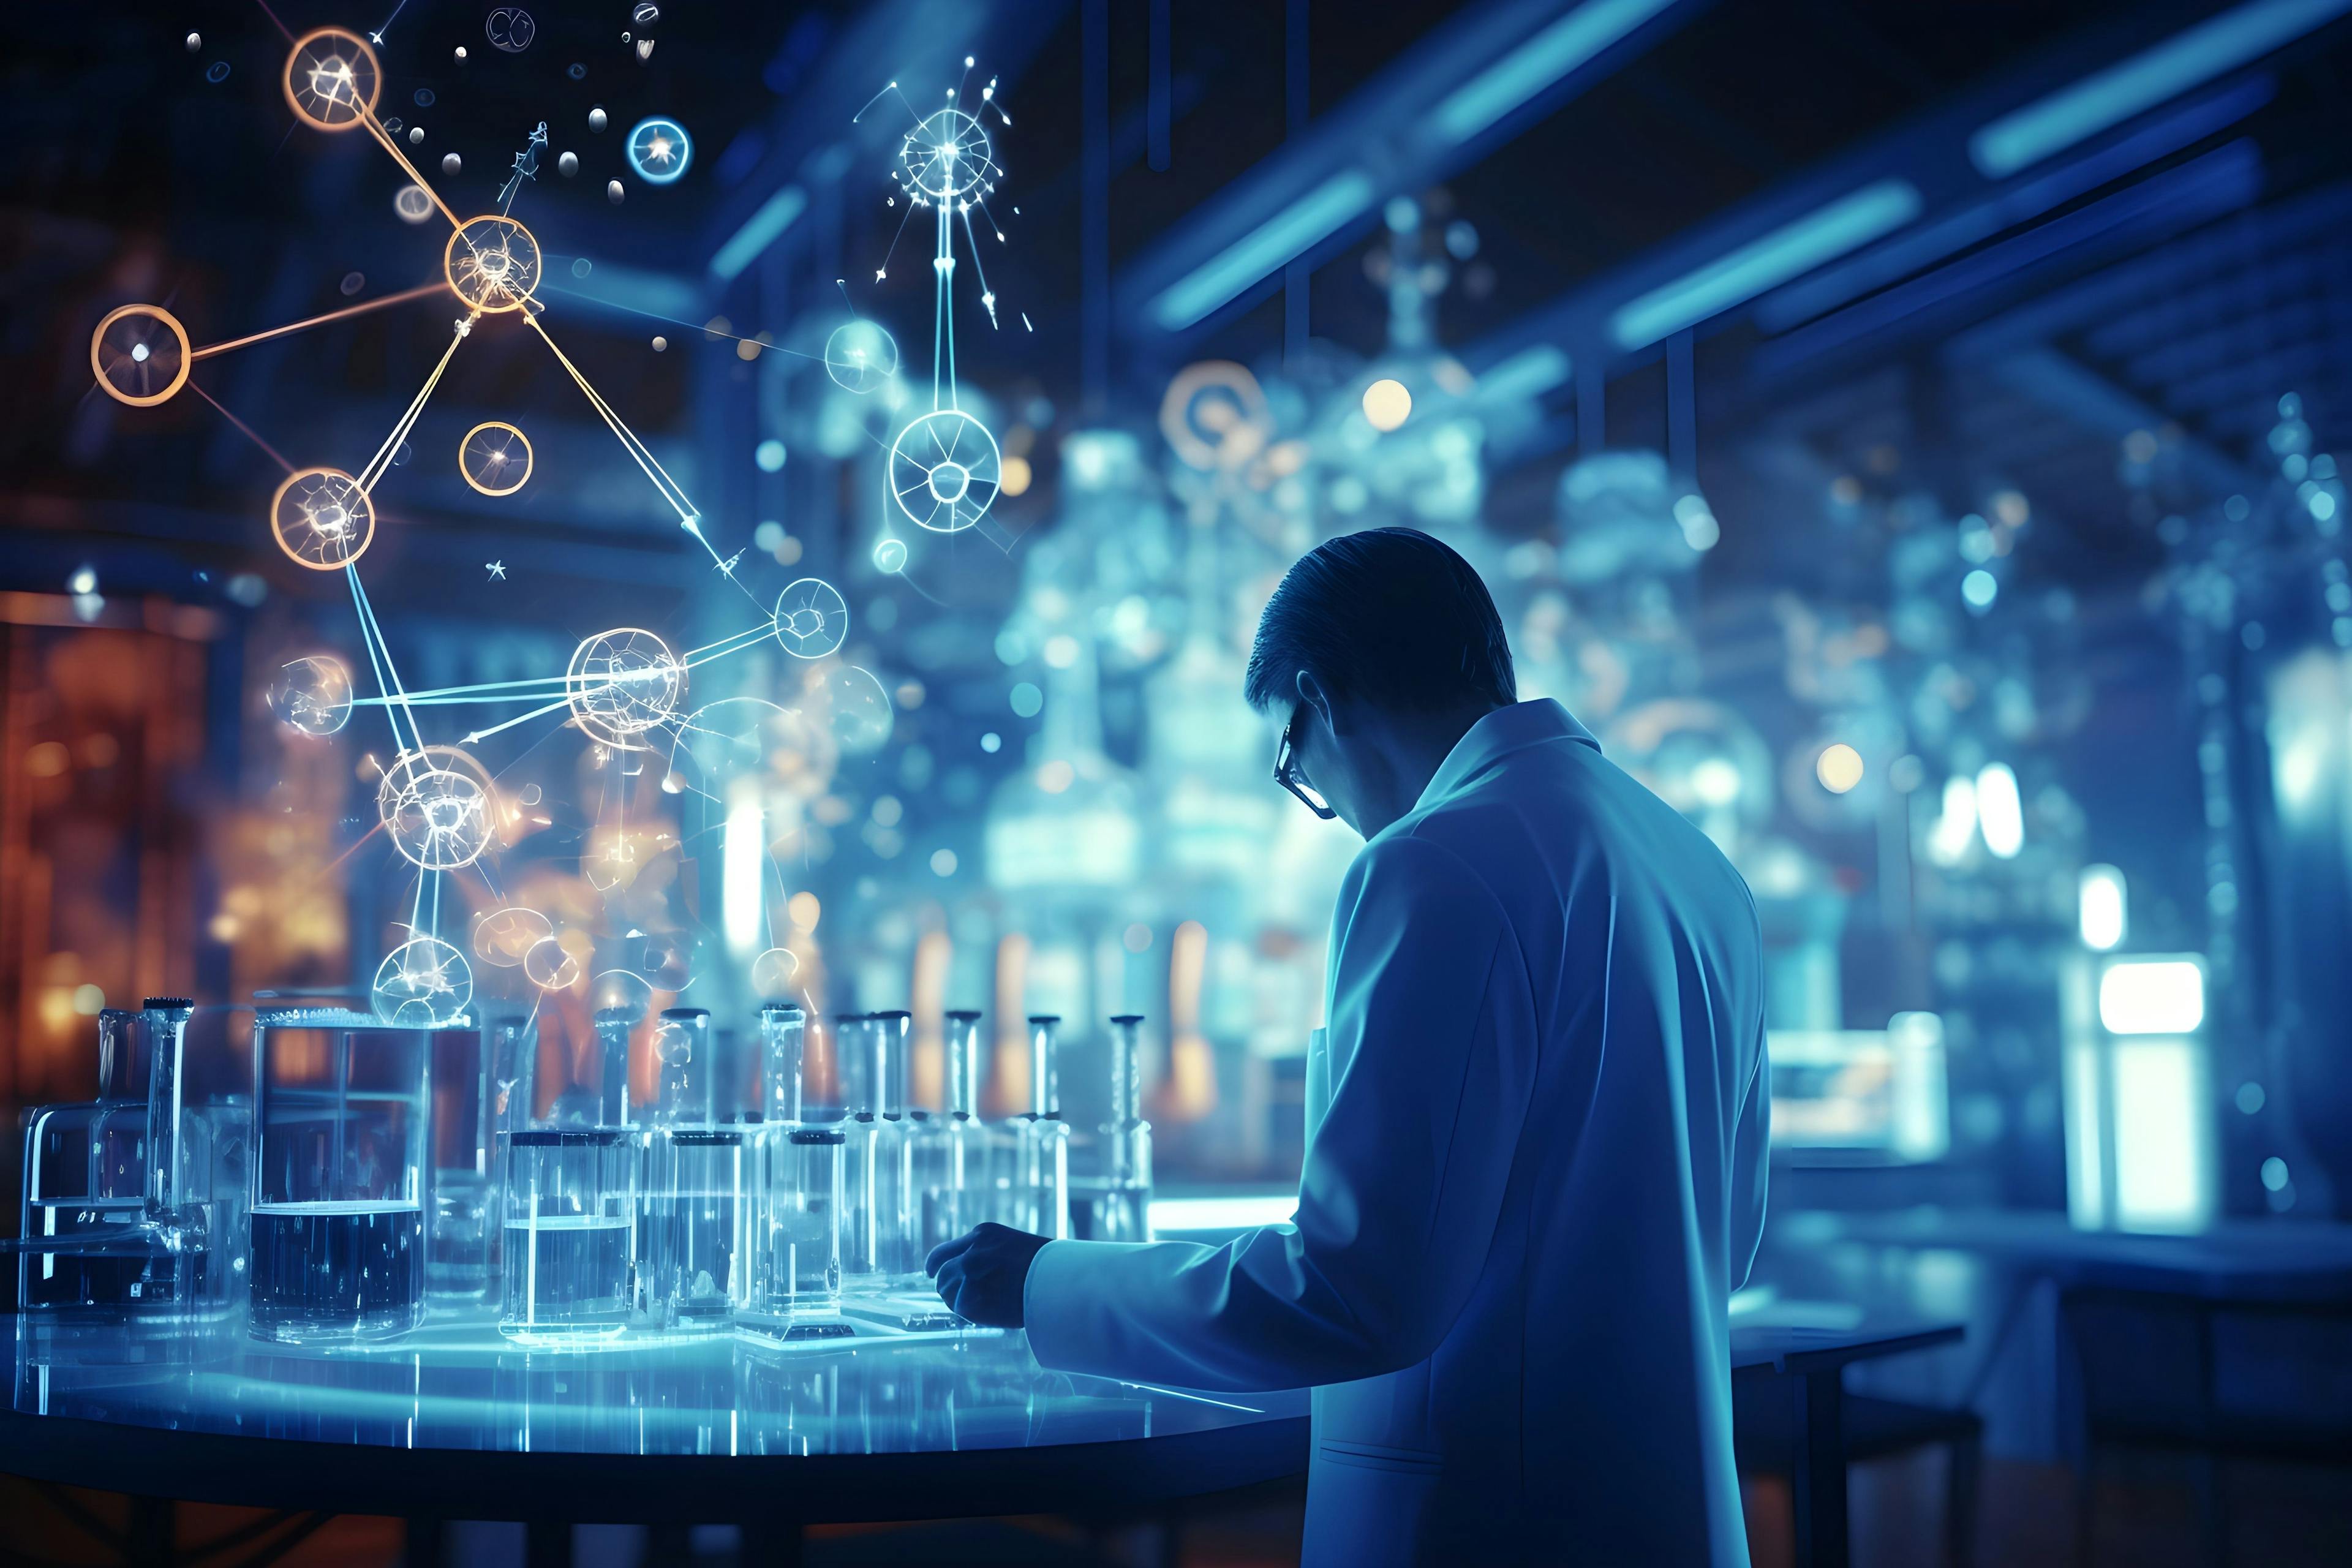 a scientist in a laboratory analyzing the molecular structure of natural hydrogen, illustrating research and development in the energy sector. | Image Credit: © Davivd - stock.adobe.com.